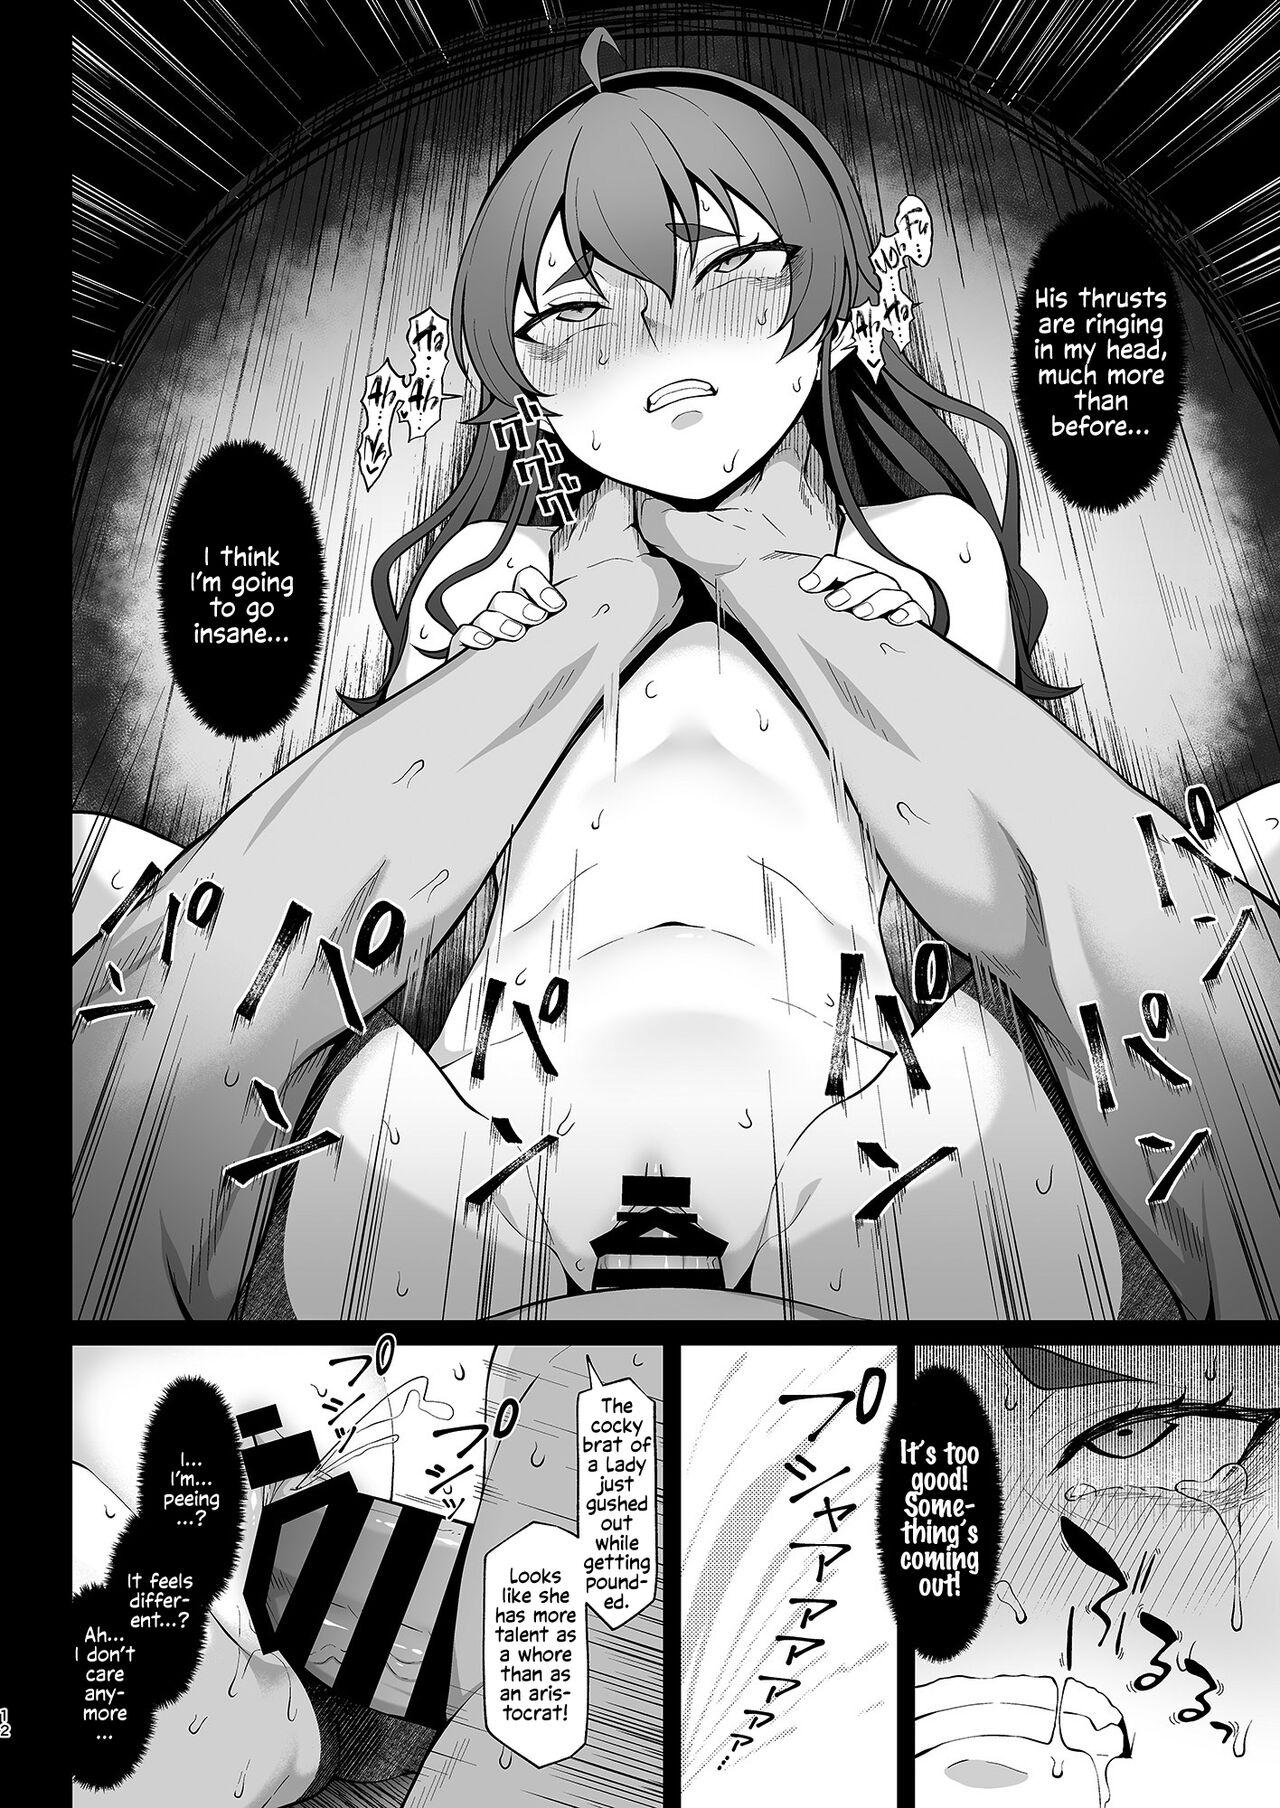 Tight You reap what you sow, Lady Eris + Omake - Mushoku tensei Sister - Page 11